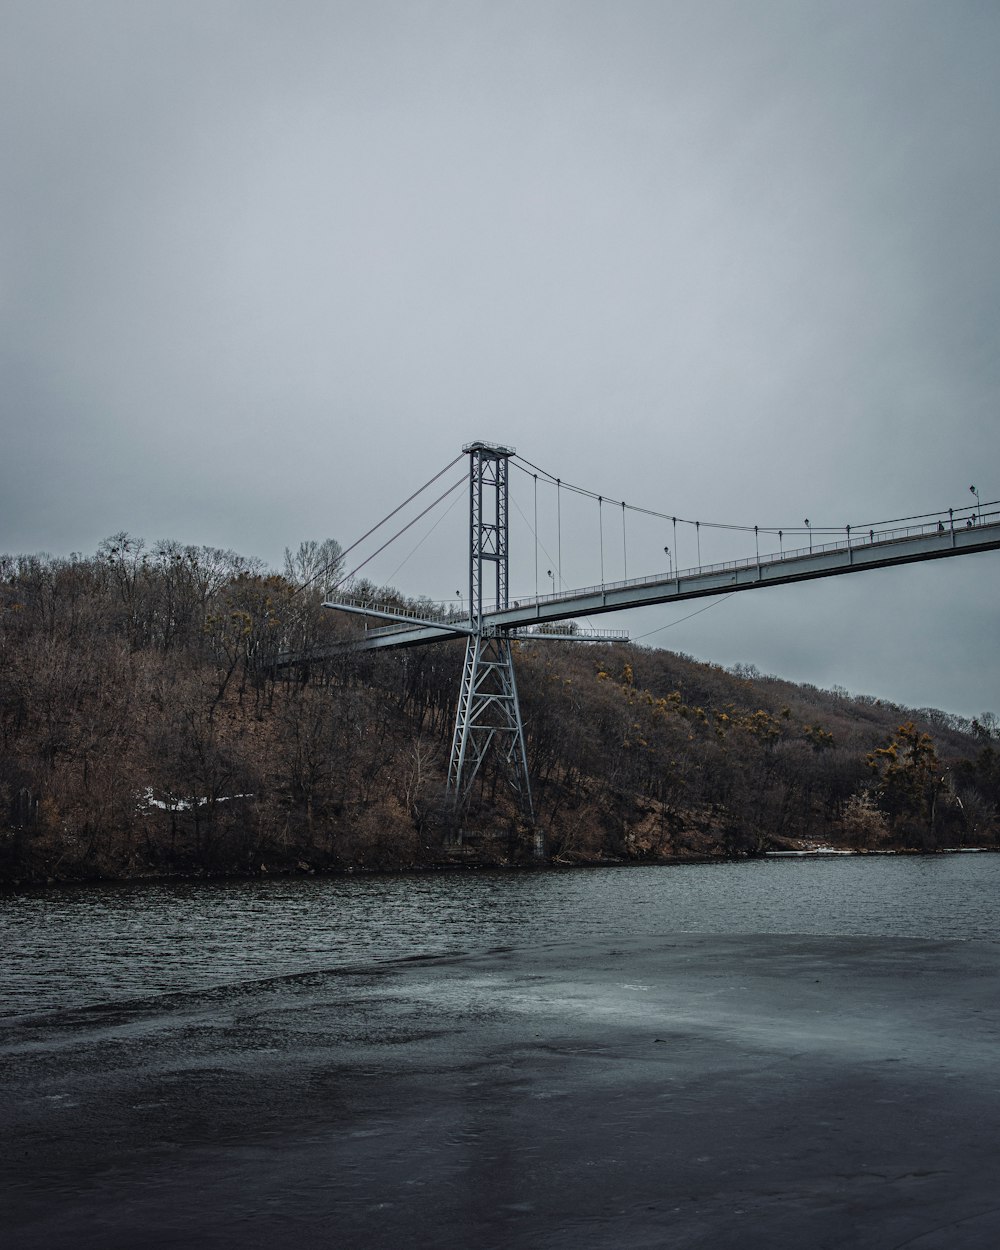 a suspension bridge over a body of water